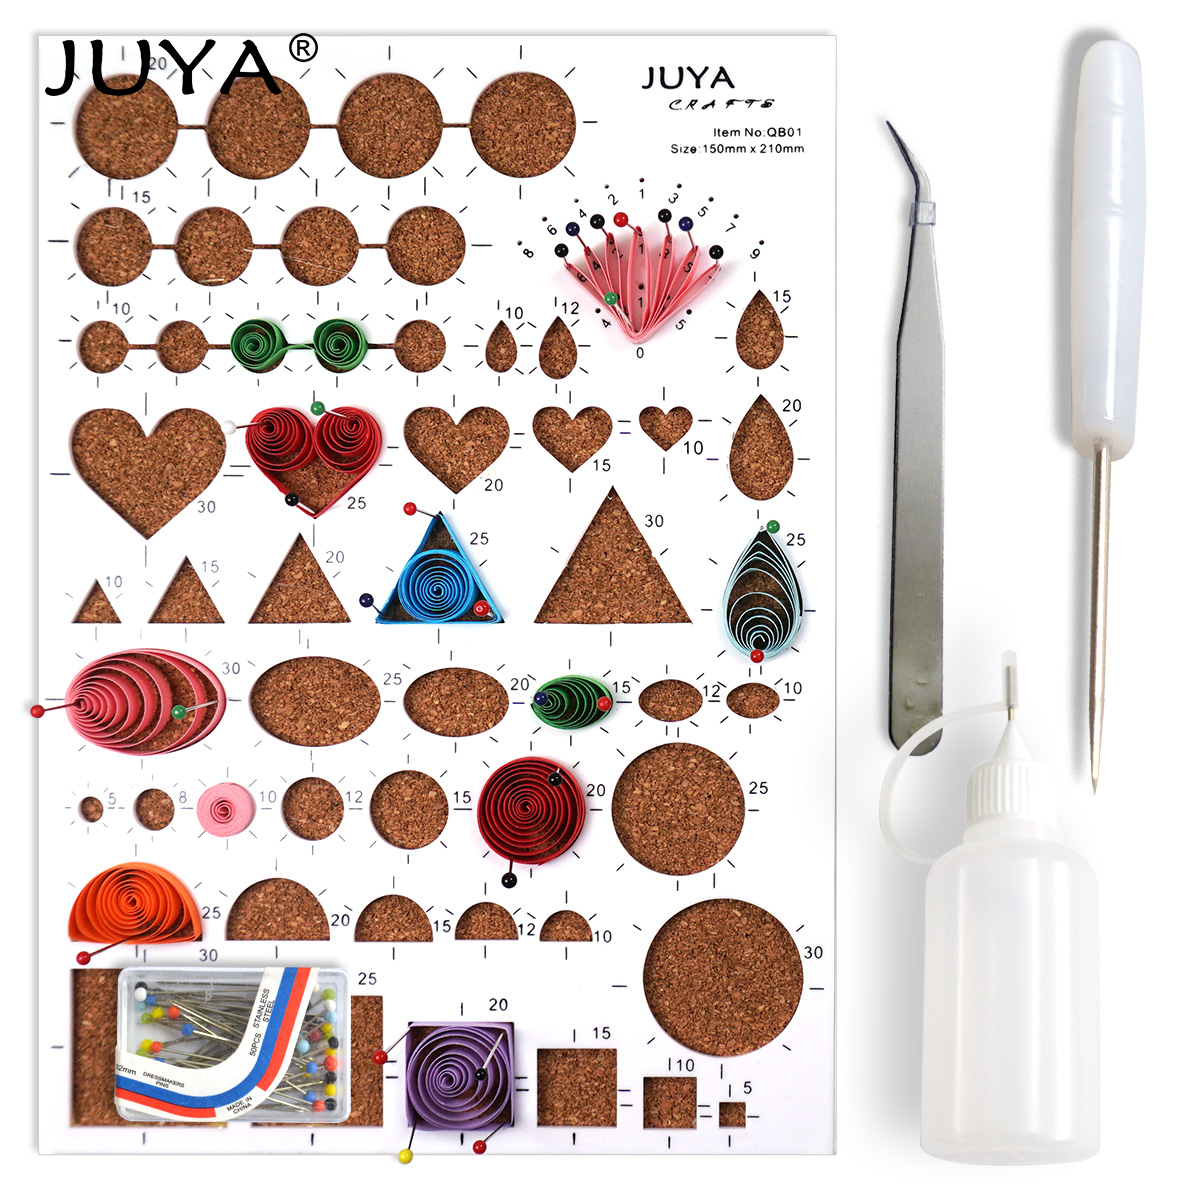  JUYA Quilling Paper and Tools Classic Set QK10 (Pink, Have Glue)